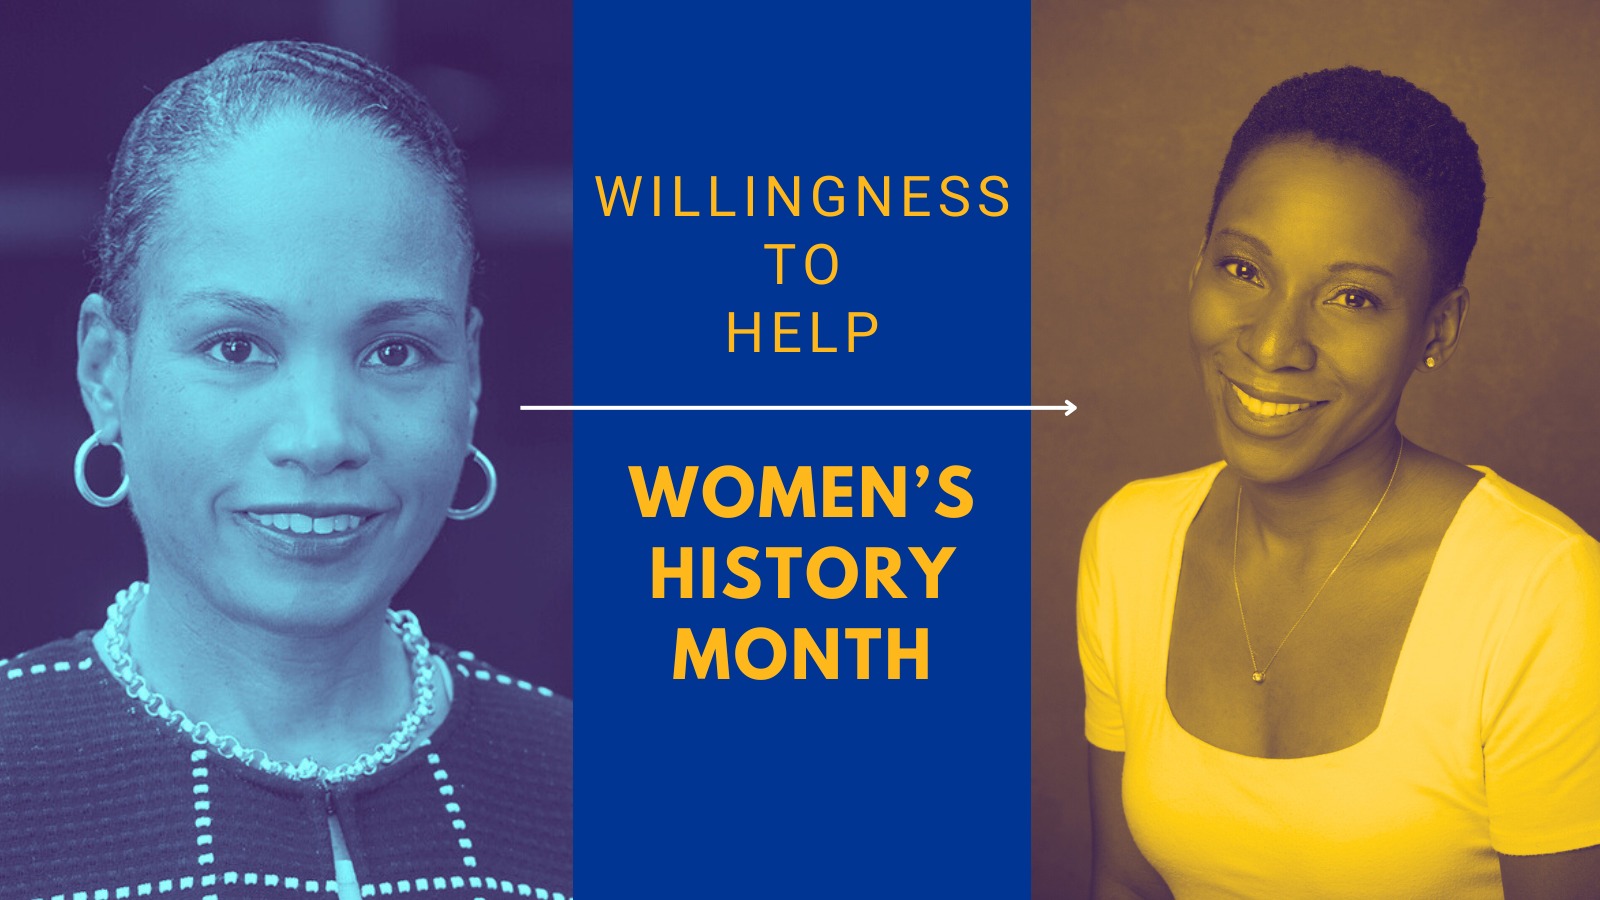 Header with two women that says: Willingness to Help